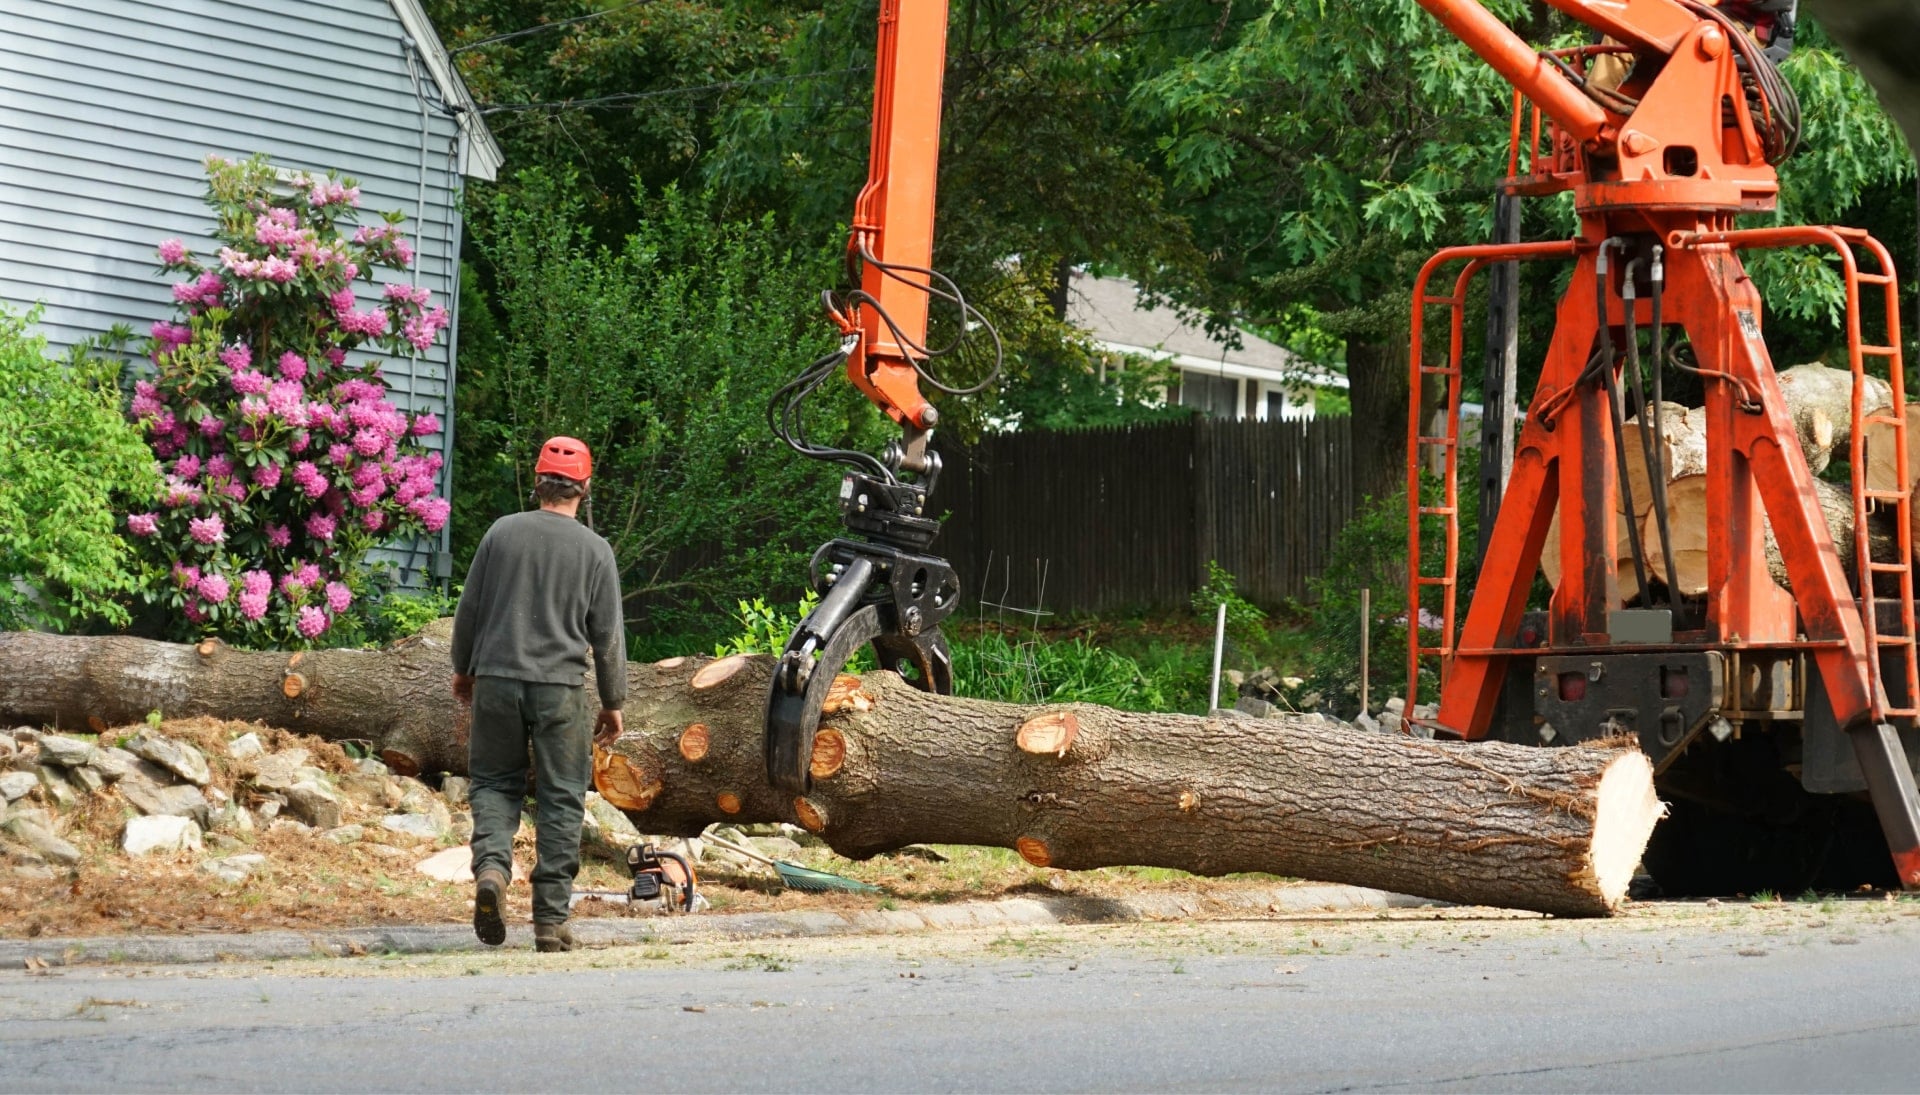 A branch has fallen in Chesapeake, Virginia yard during tree removal